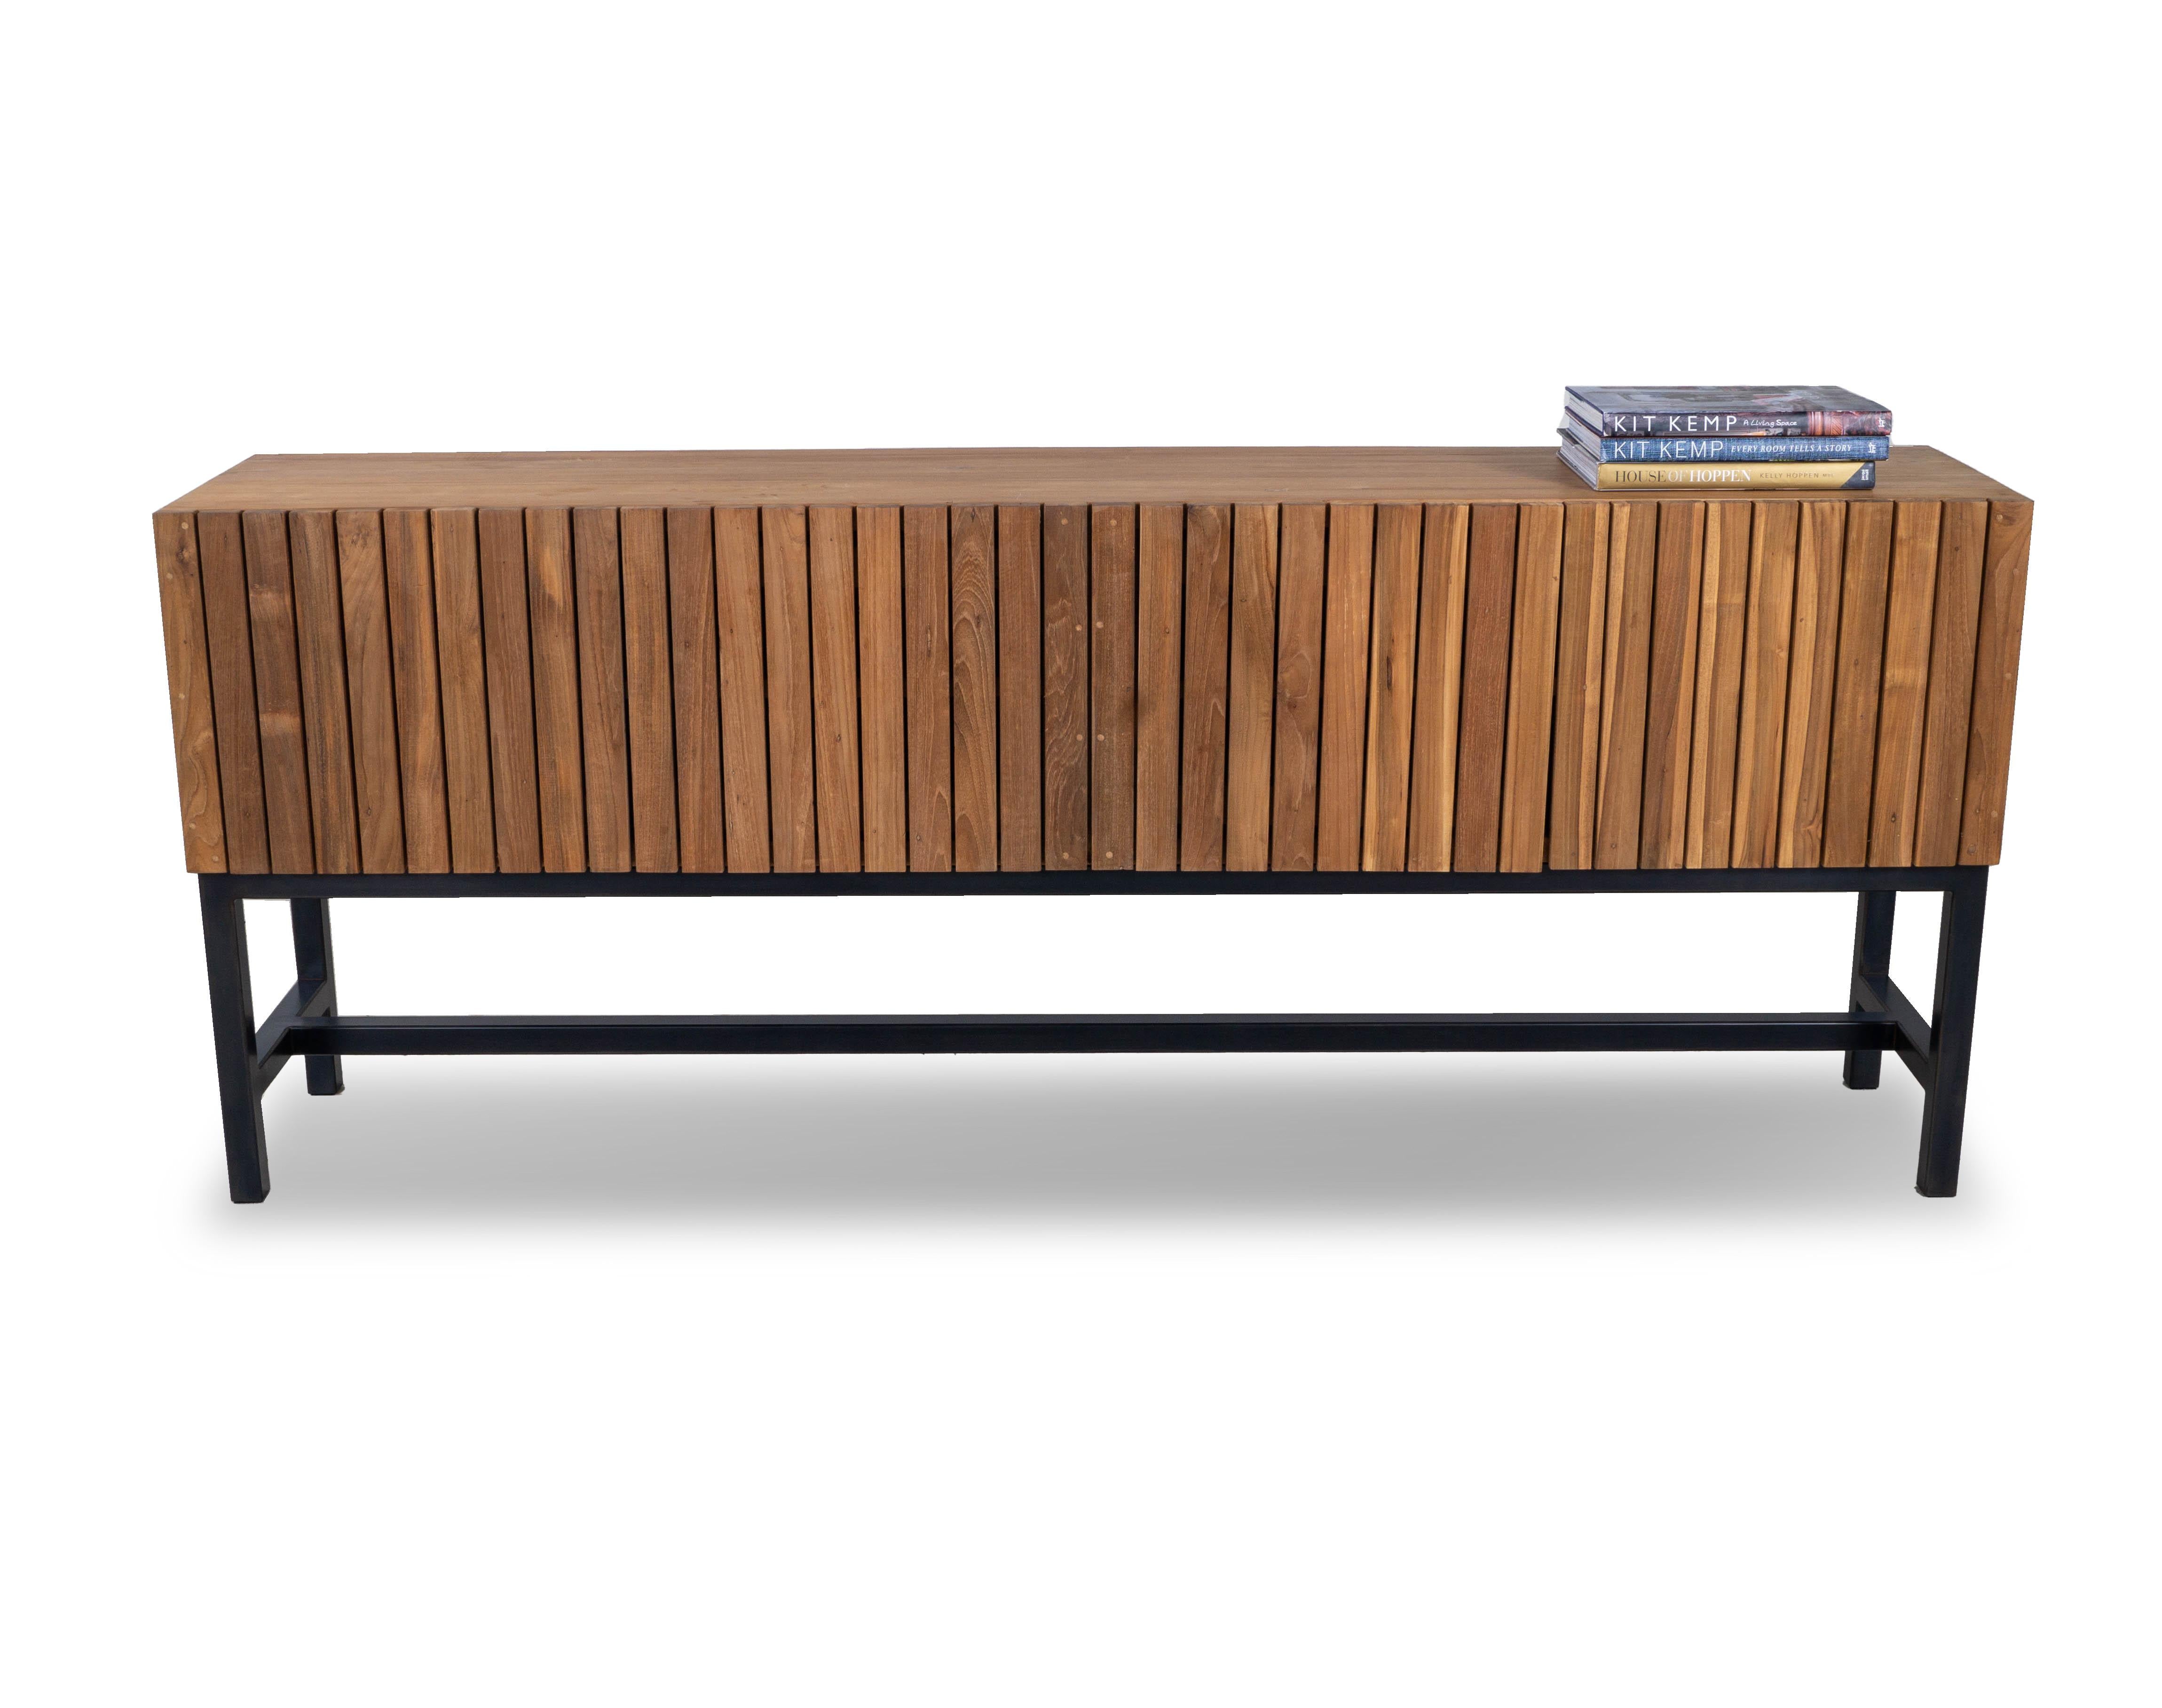 Introducing the Mid-Century Modern Slat Front Console, a beautiful cabinet made from high-quality organic slats. This furniture piece is perfect for any home with a mid-century aesthetic, or for anyone who desires a natural and organically inspired